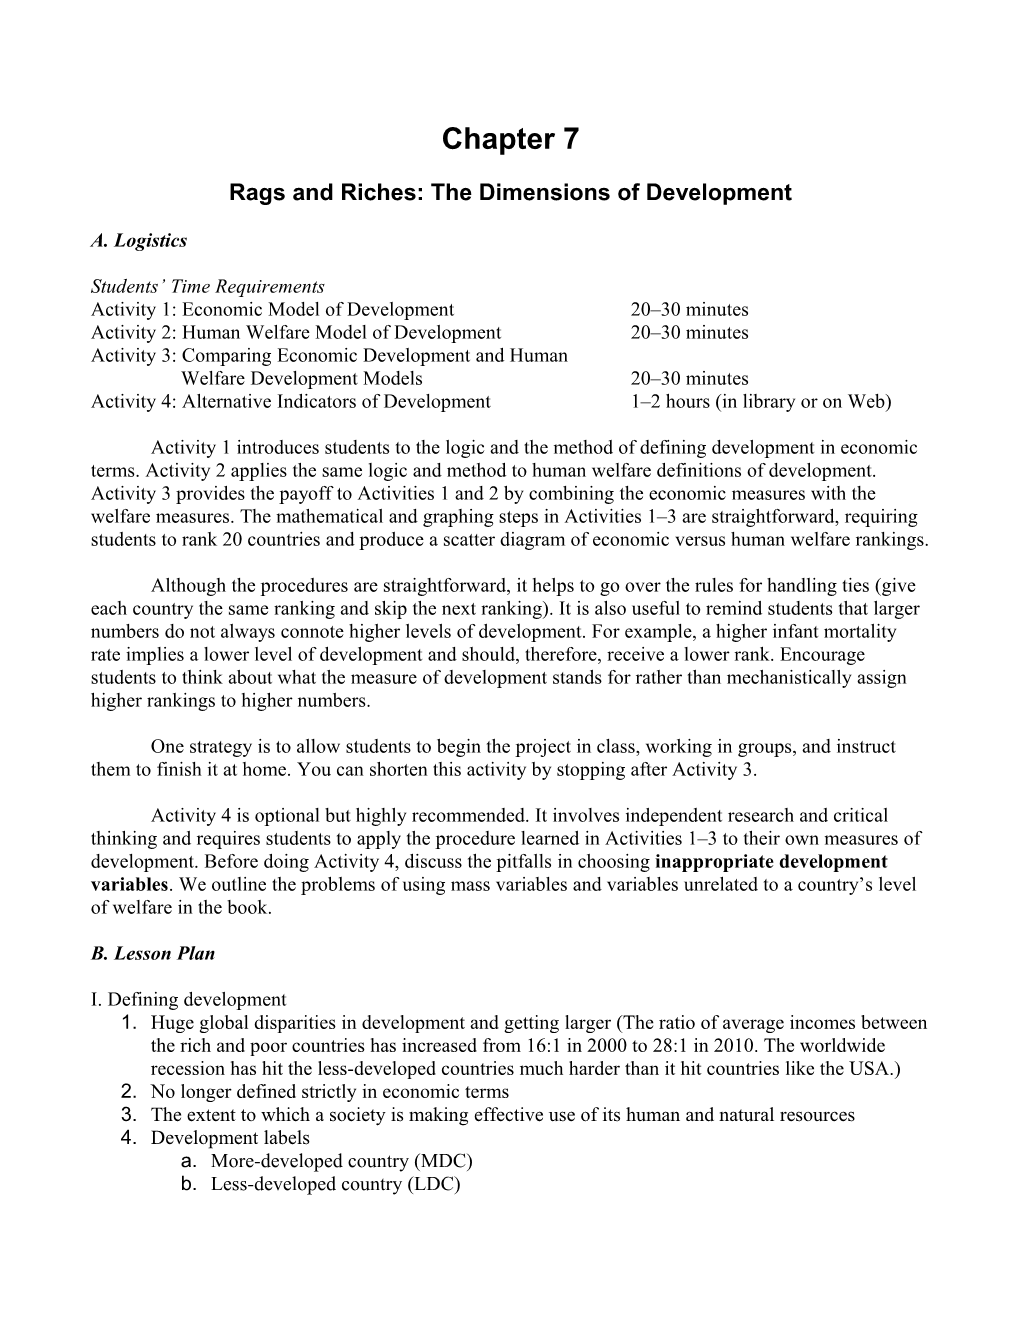 Rags and Riches: the Dimensions of Development